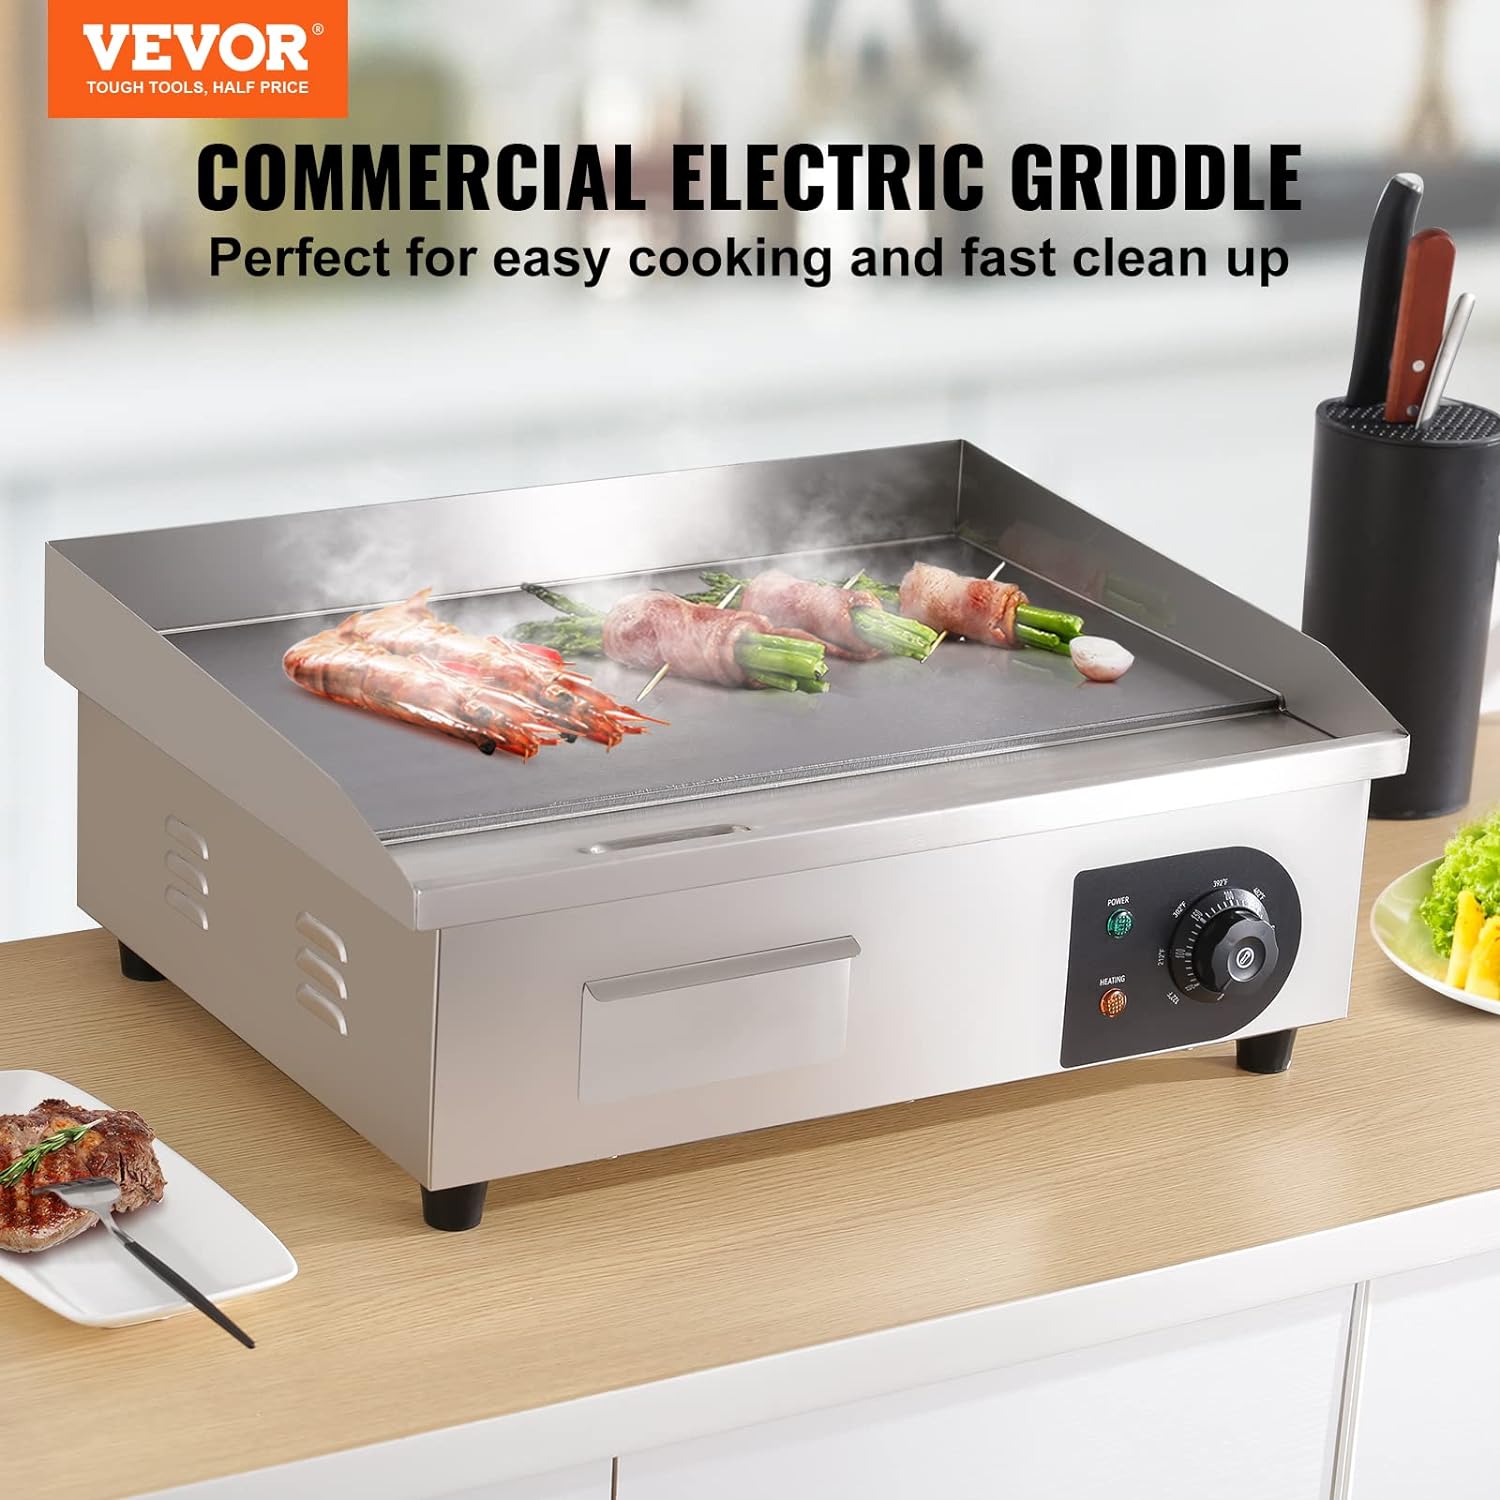 22 1600W Electric Countertop Griddle with Adjustable Temp Control - VEVOR - VEVOR Electric Countertop Griddle Review